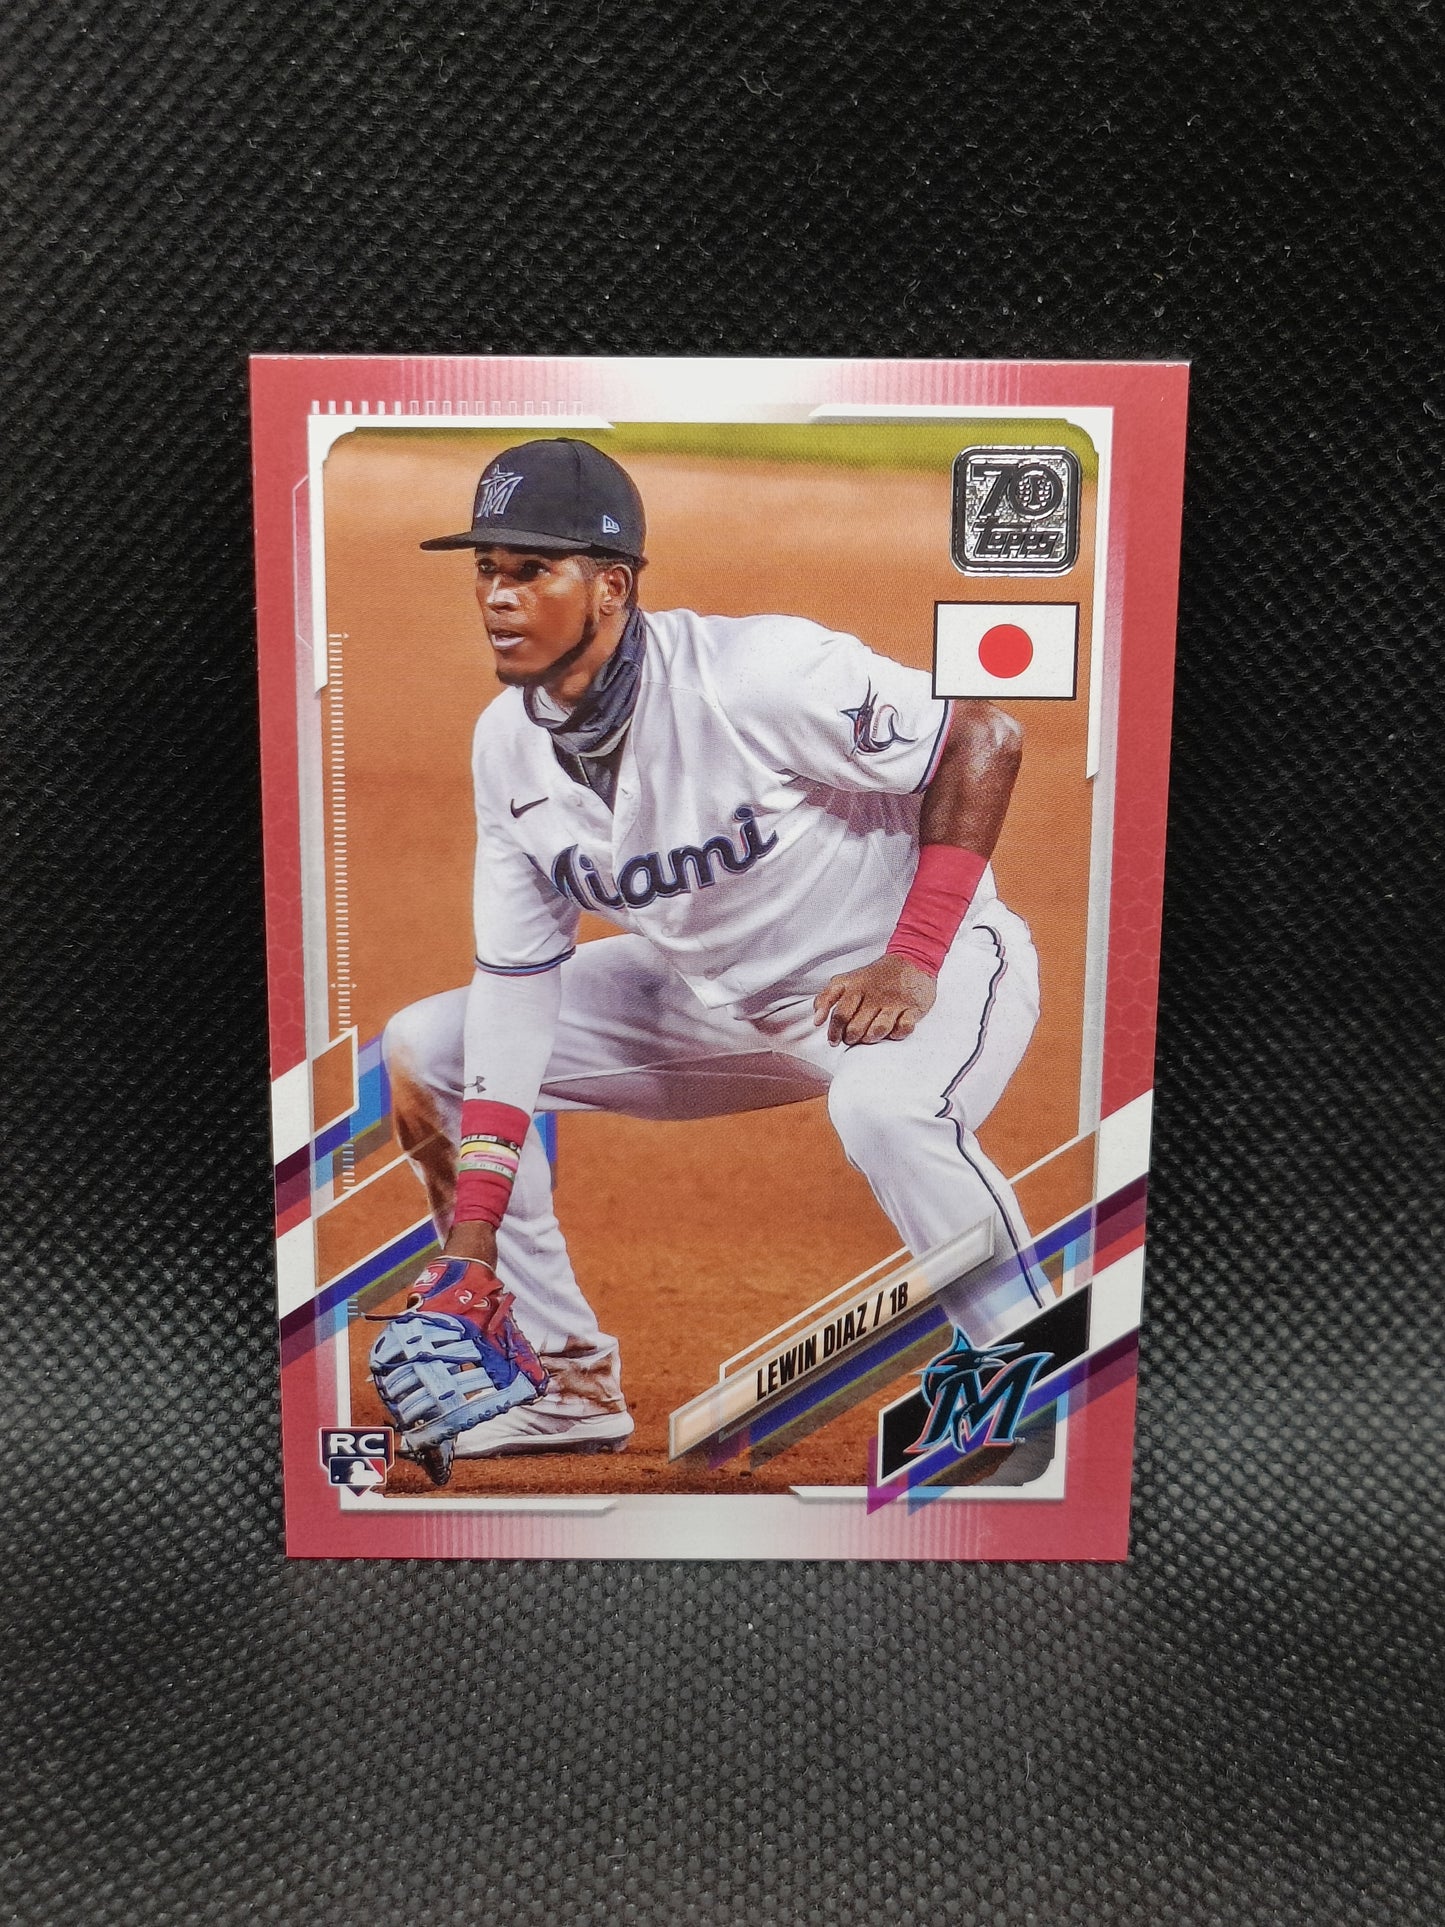 Lewin Diaz - 2021 Topps Japan Edition Rookie Red /5 - Miami Marlins